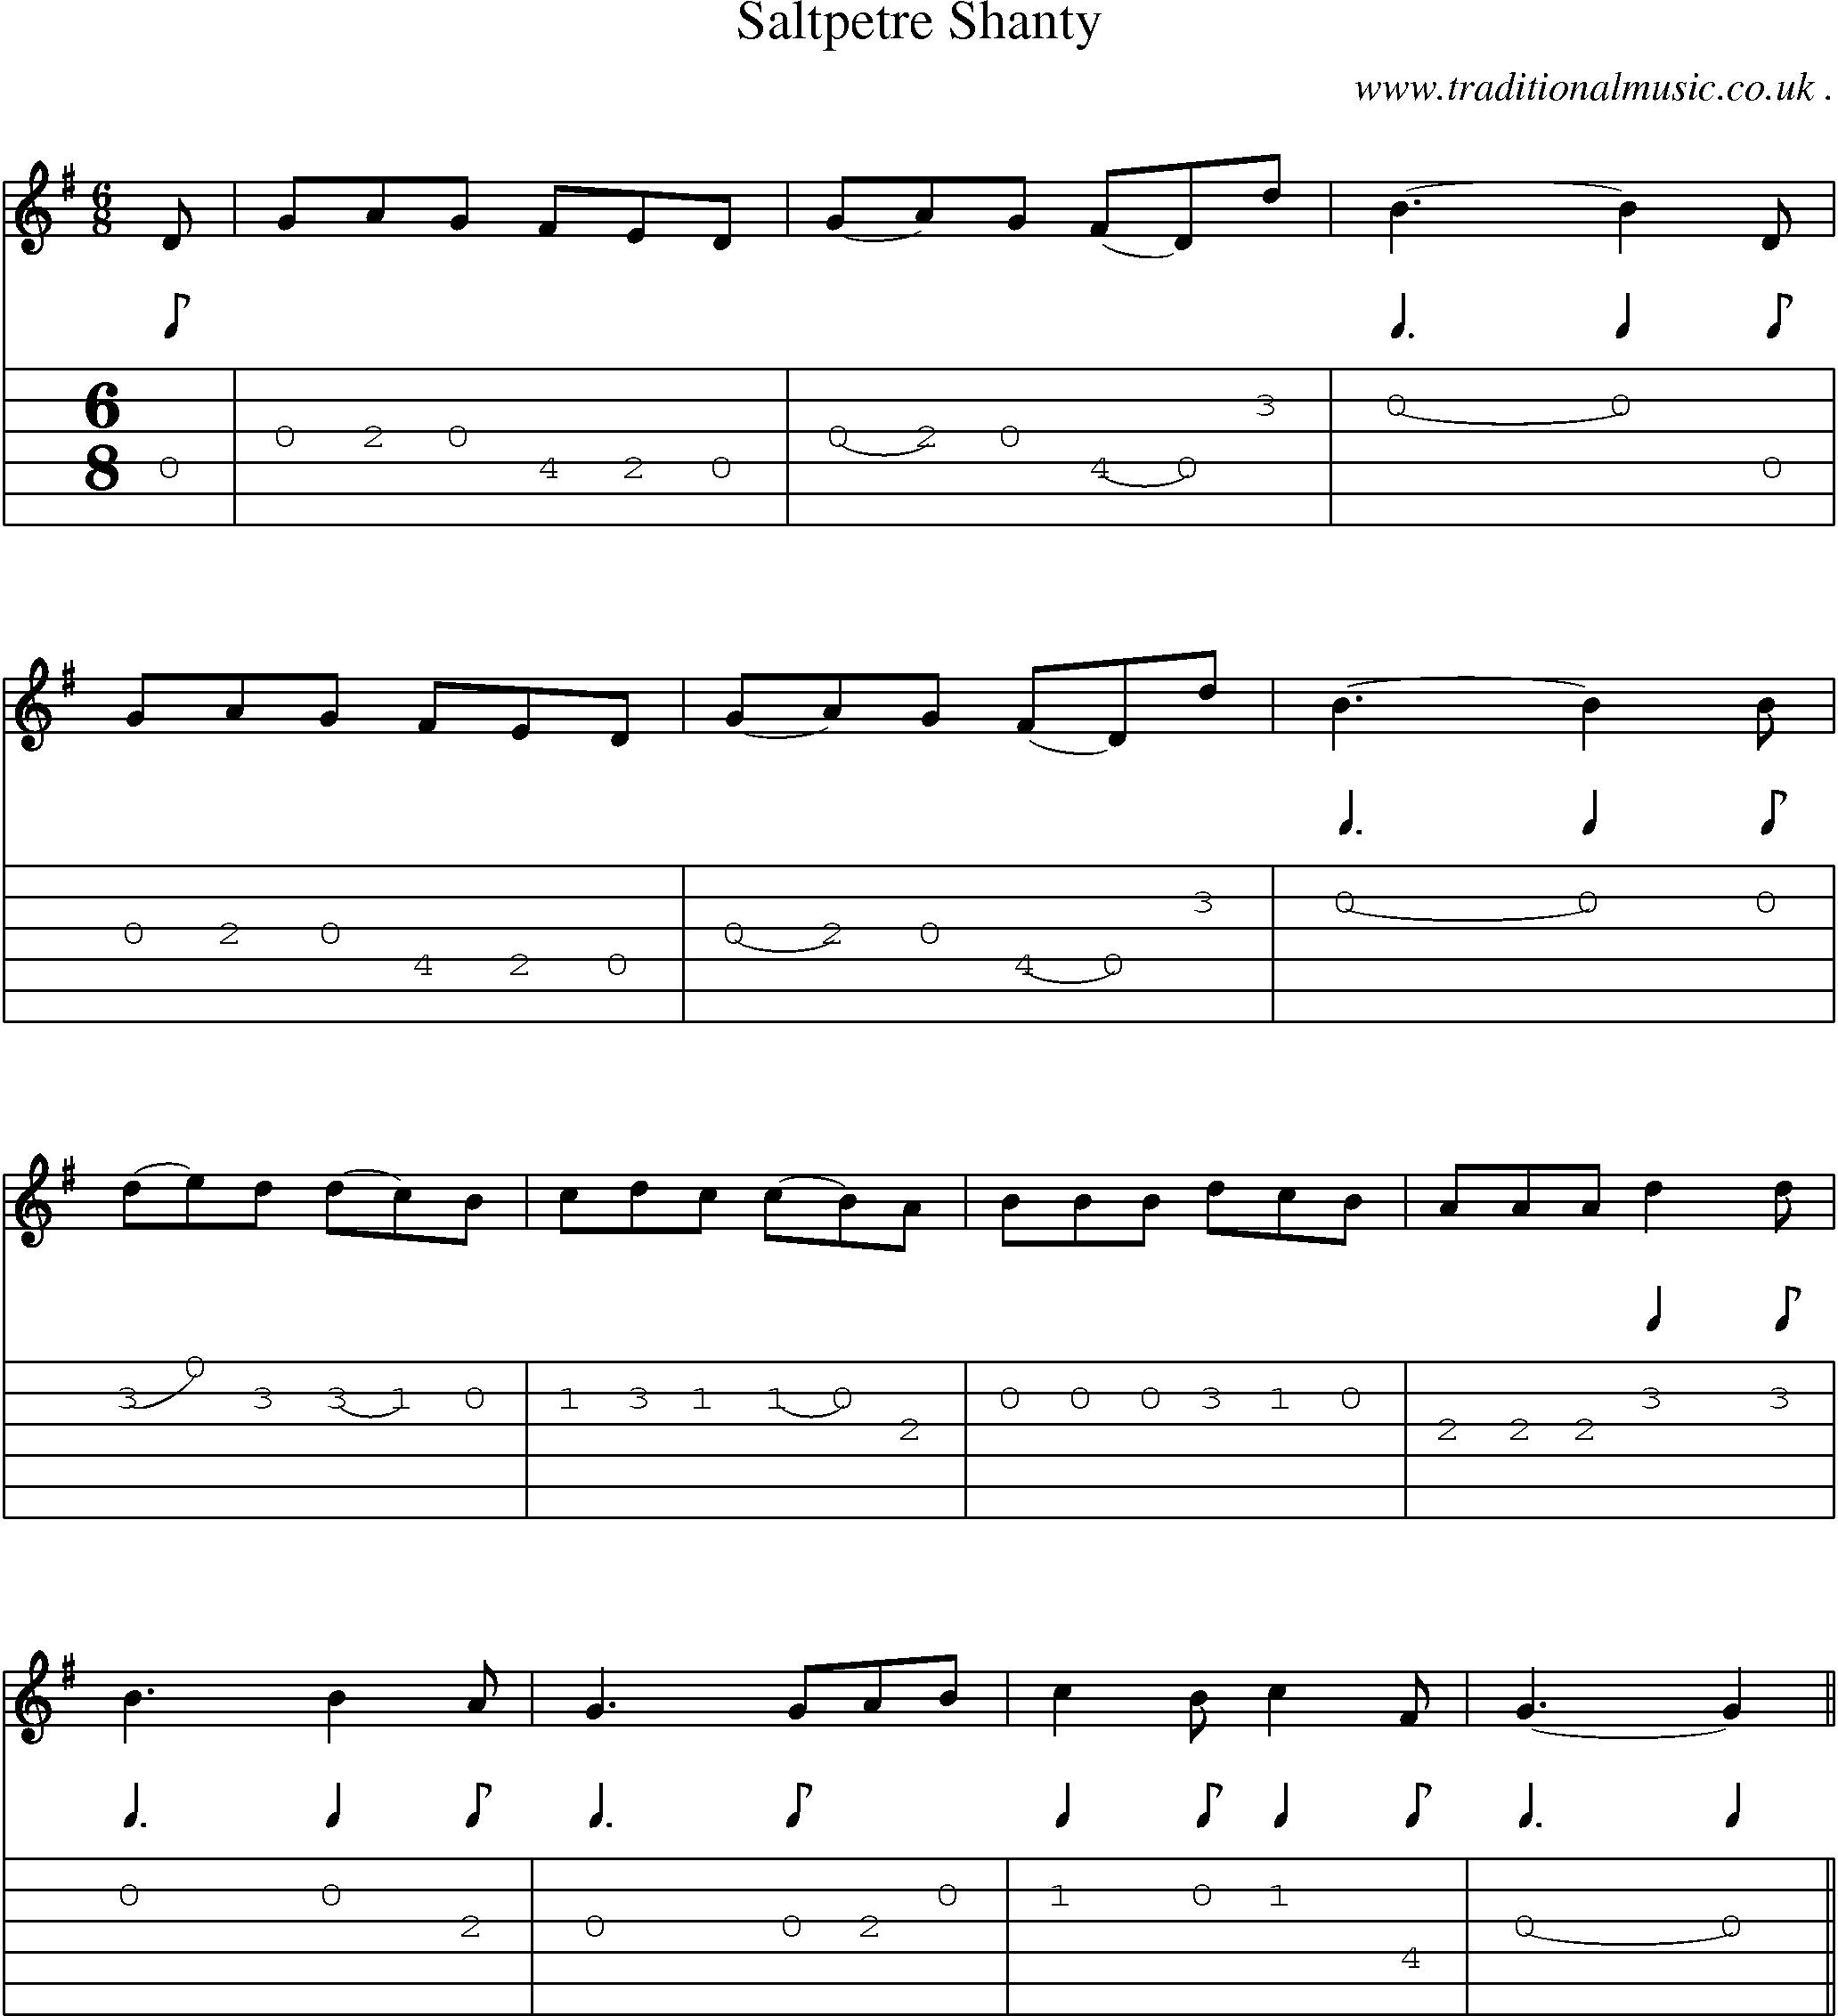 Sheet-Music and Guitar Tabs for Saltpetre Shanty